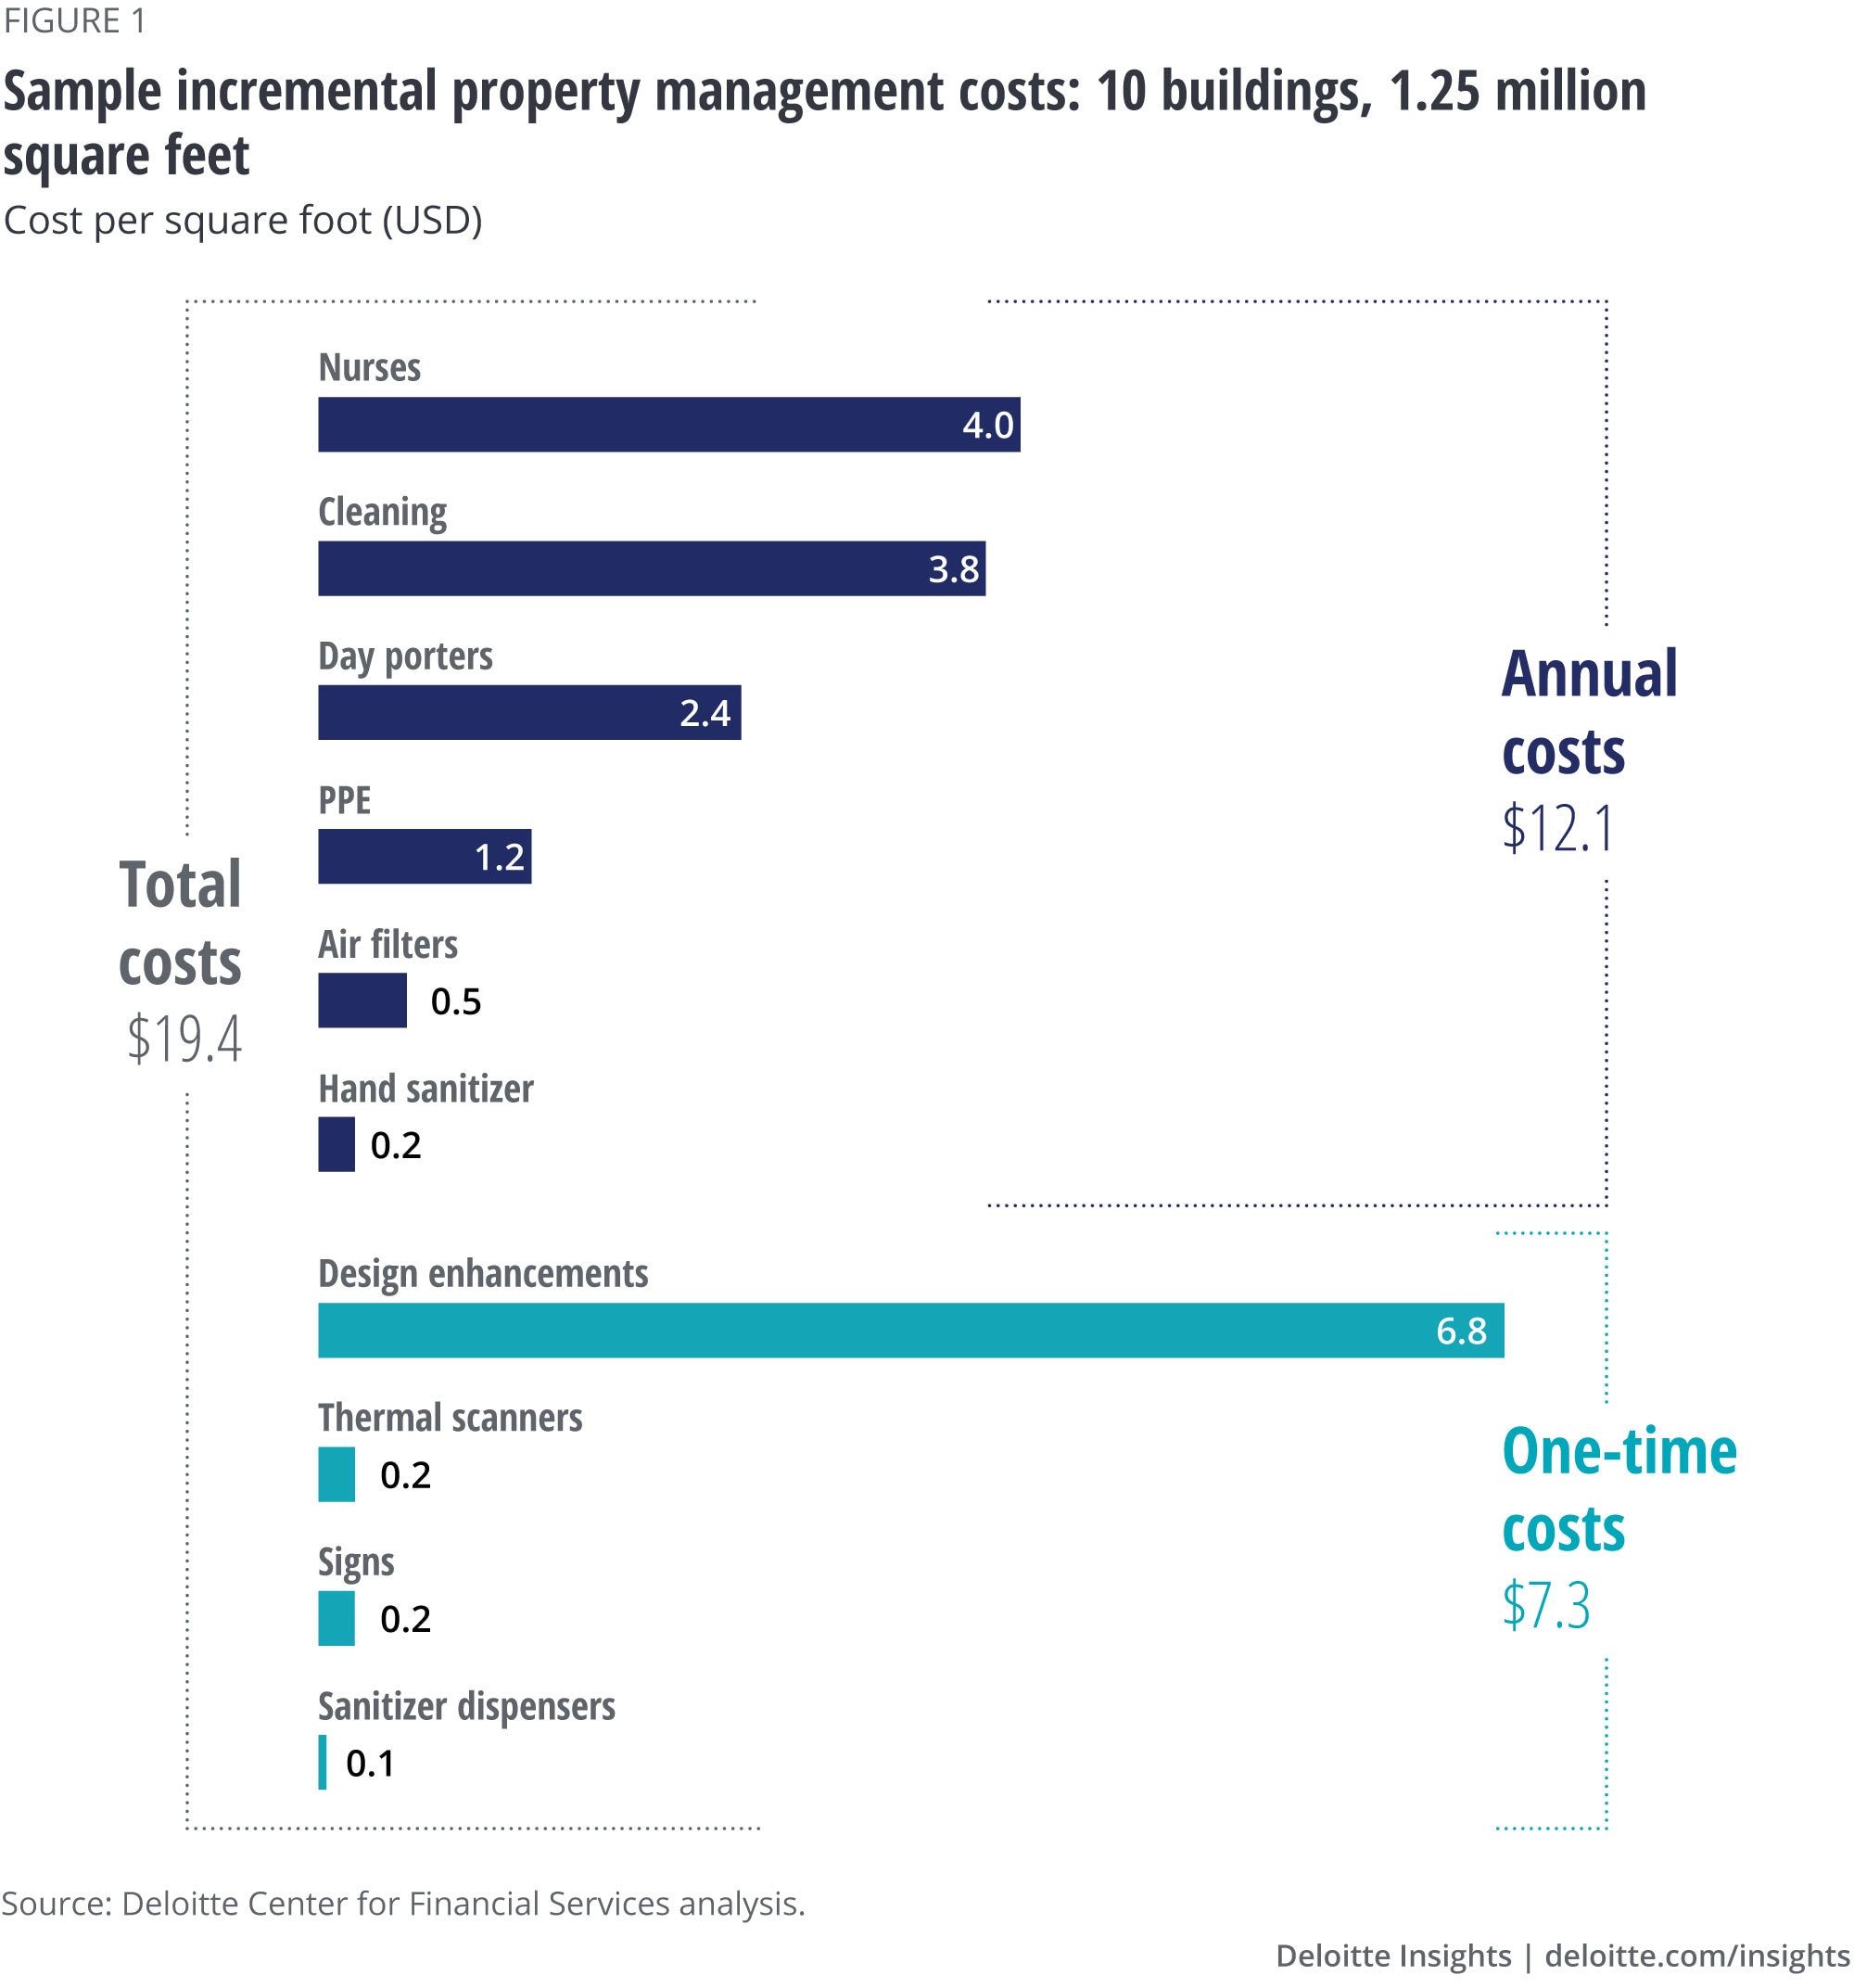 Incremental property management costs for a portfolio of 10 buildings totaling 1.25 million SF